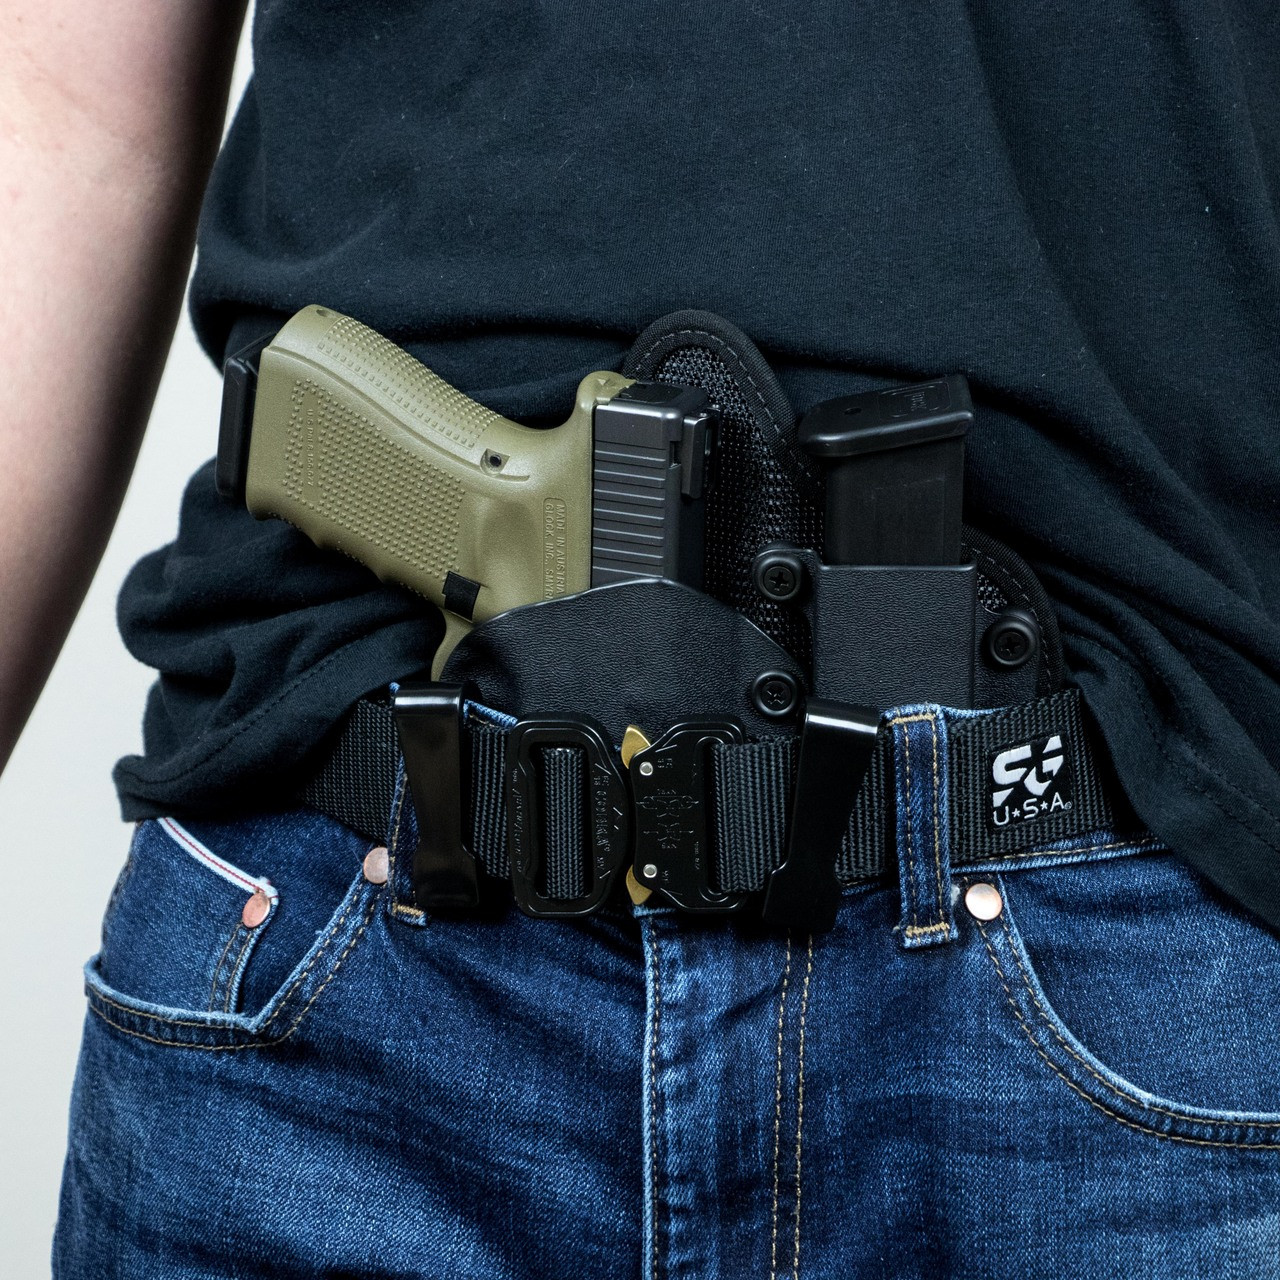 Best Appendix Carry Holsters